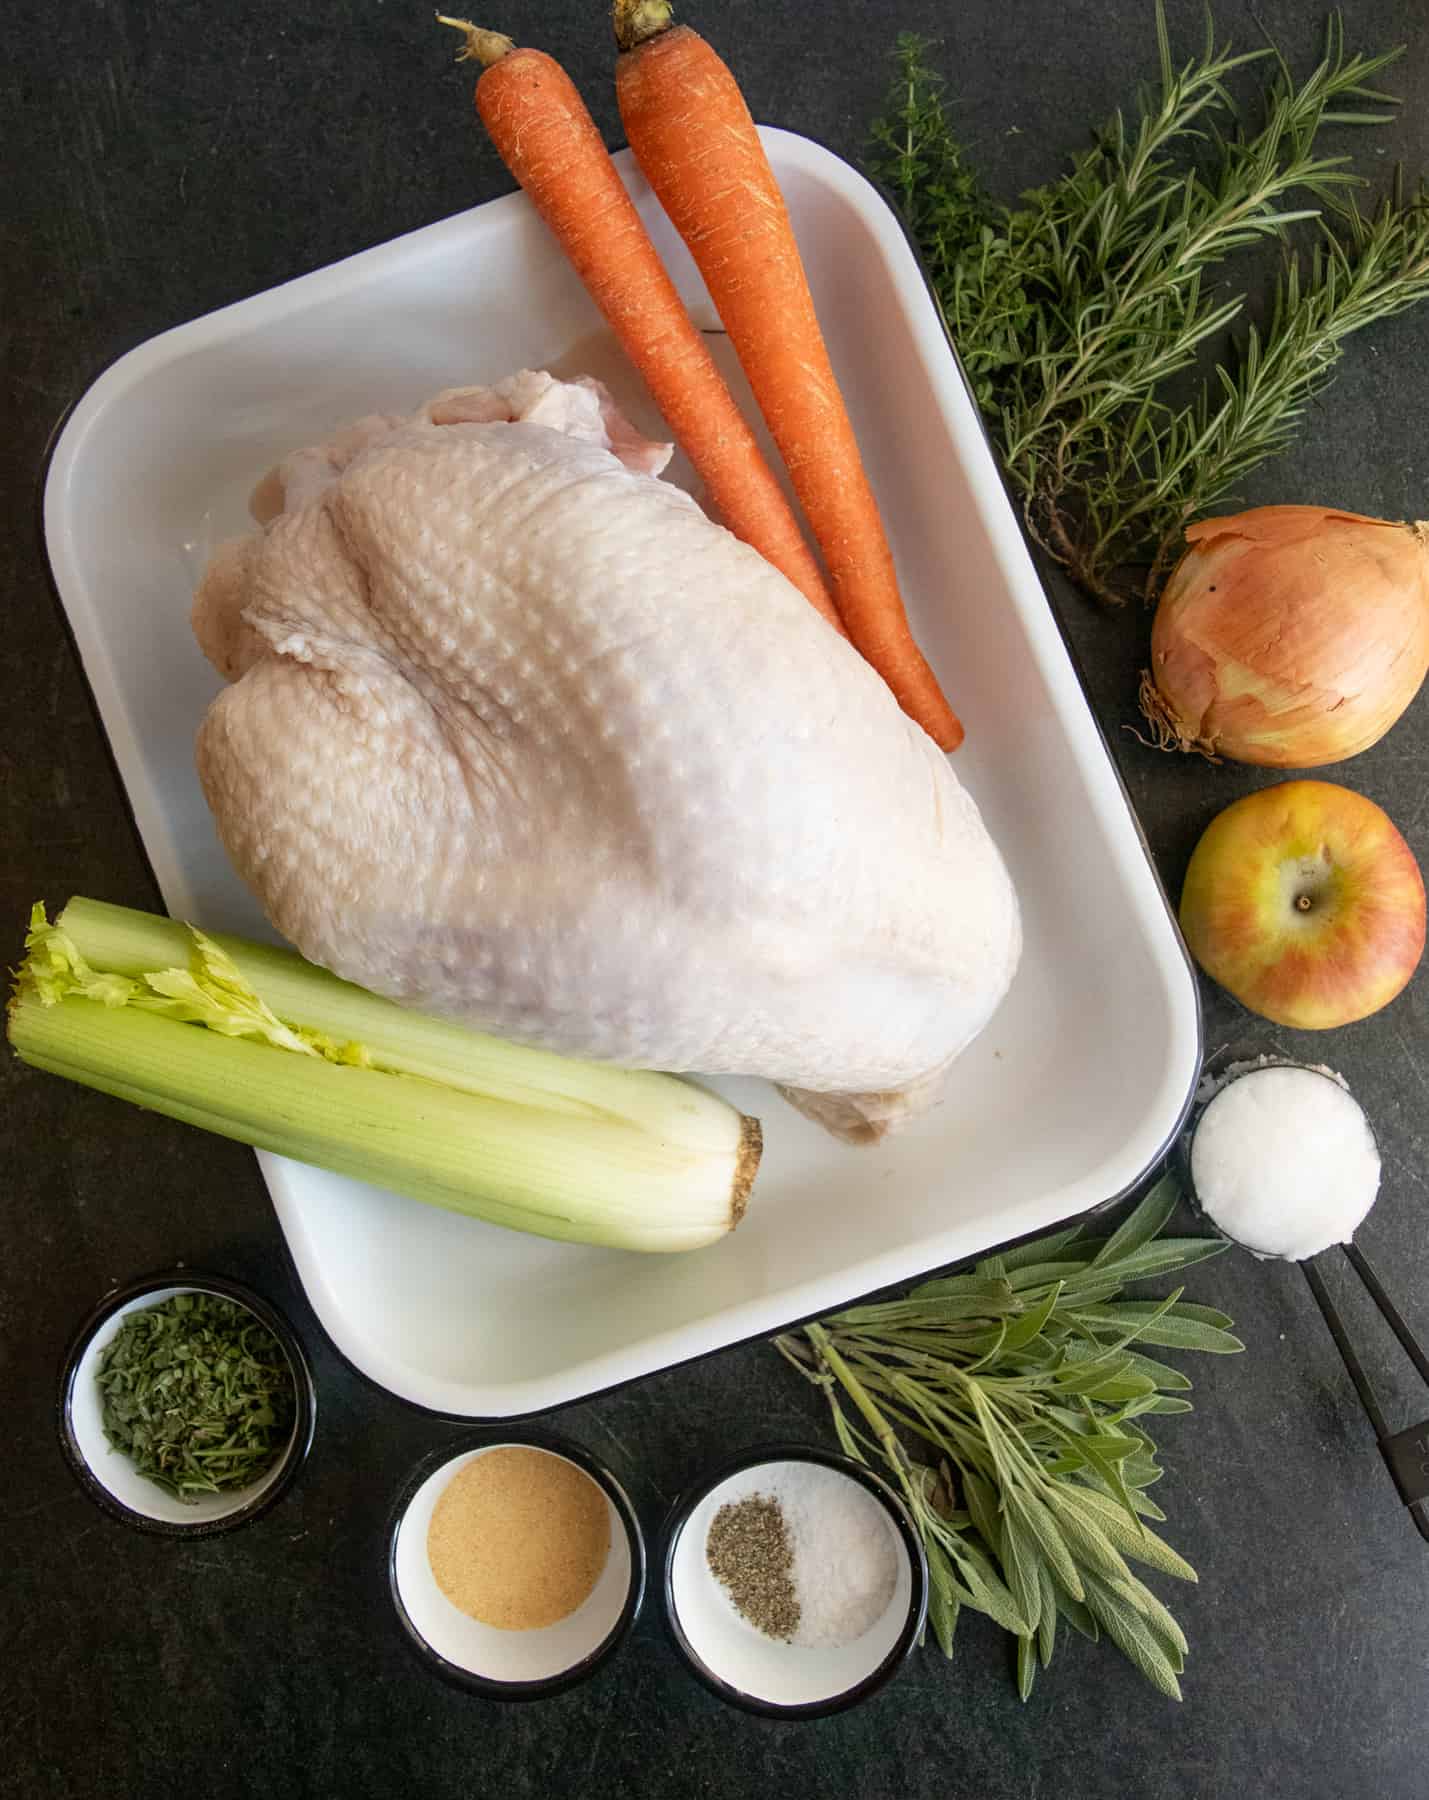 Ingredients sit on a white plate on a dark background - turkey breast, carrots, celery, apple, onion, herbs, and spices.